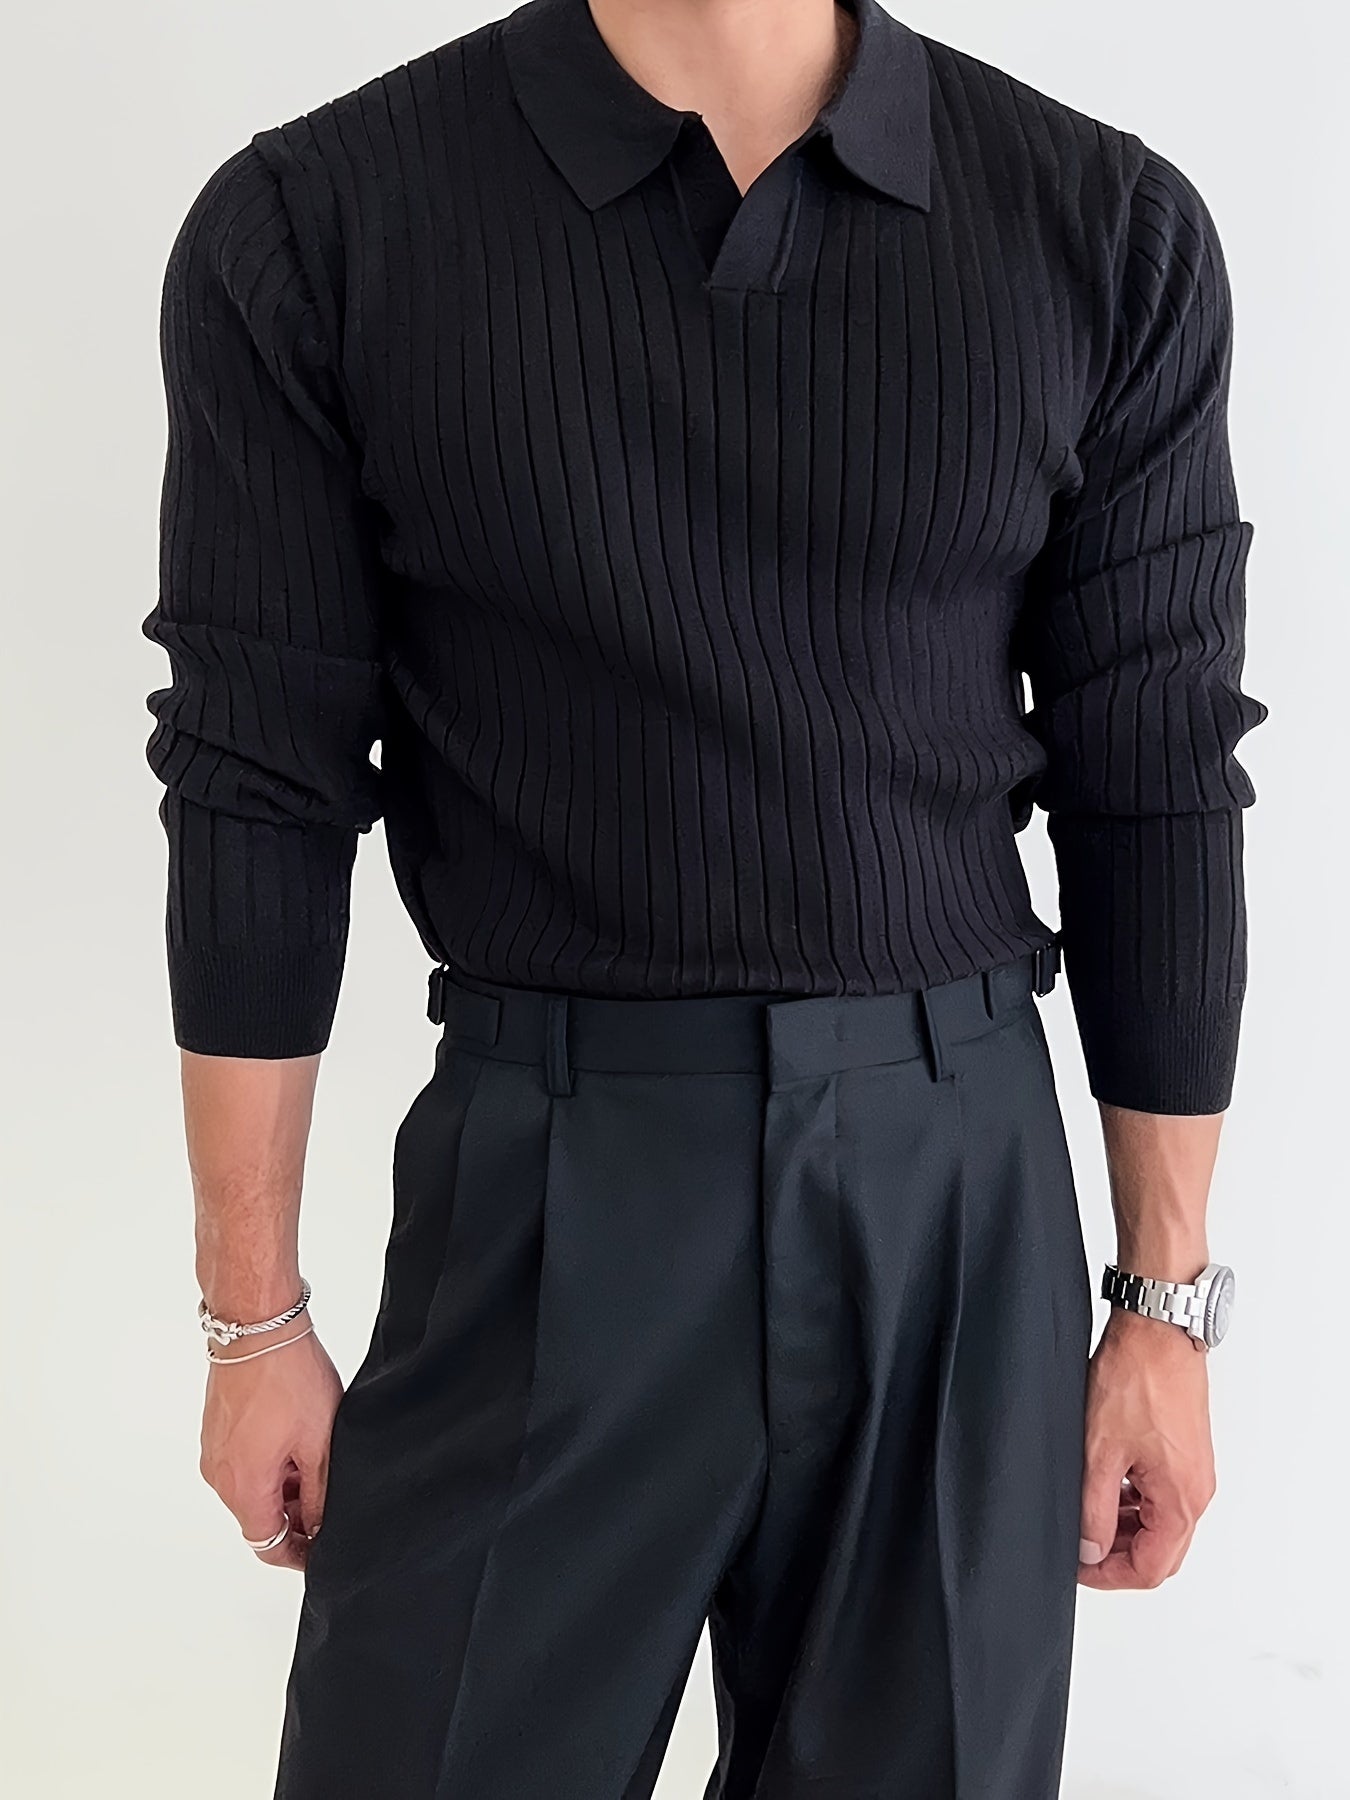 Foruwish - Solid Chic Knit Shirt, Men's Casual Lapel Slightly Stretch V-Neck Pullover Sweater For Autumn Winter